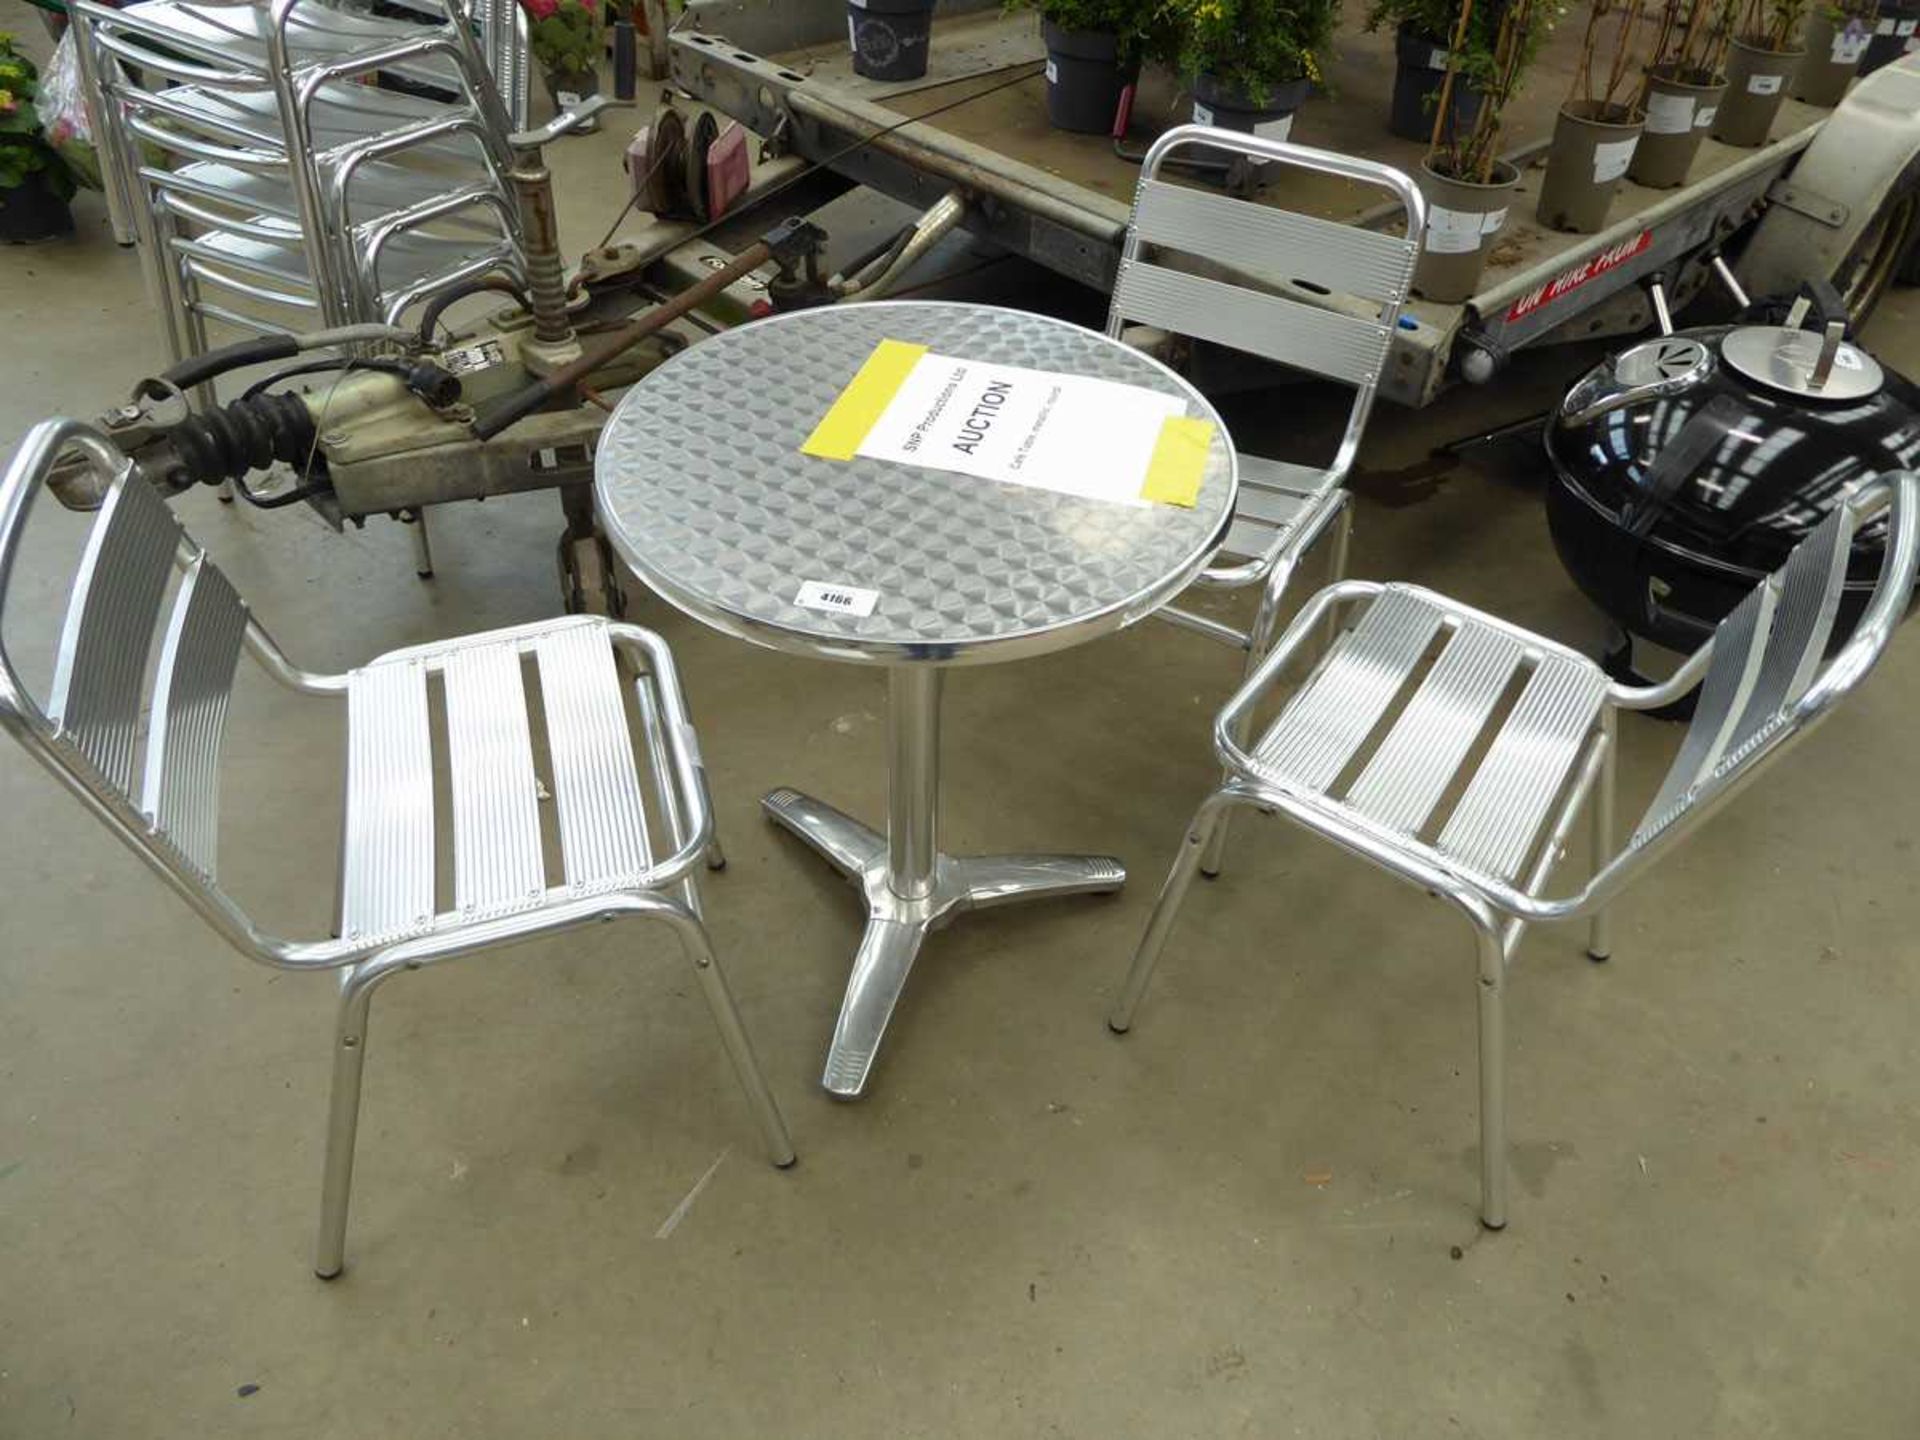 +VAT Small round bistro table and 3 chairs